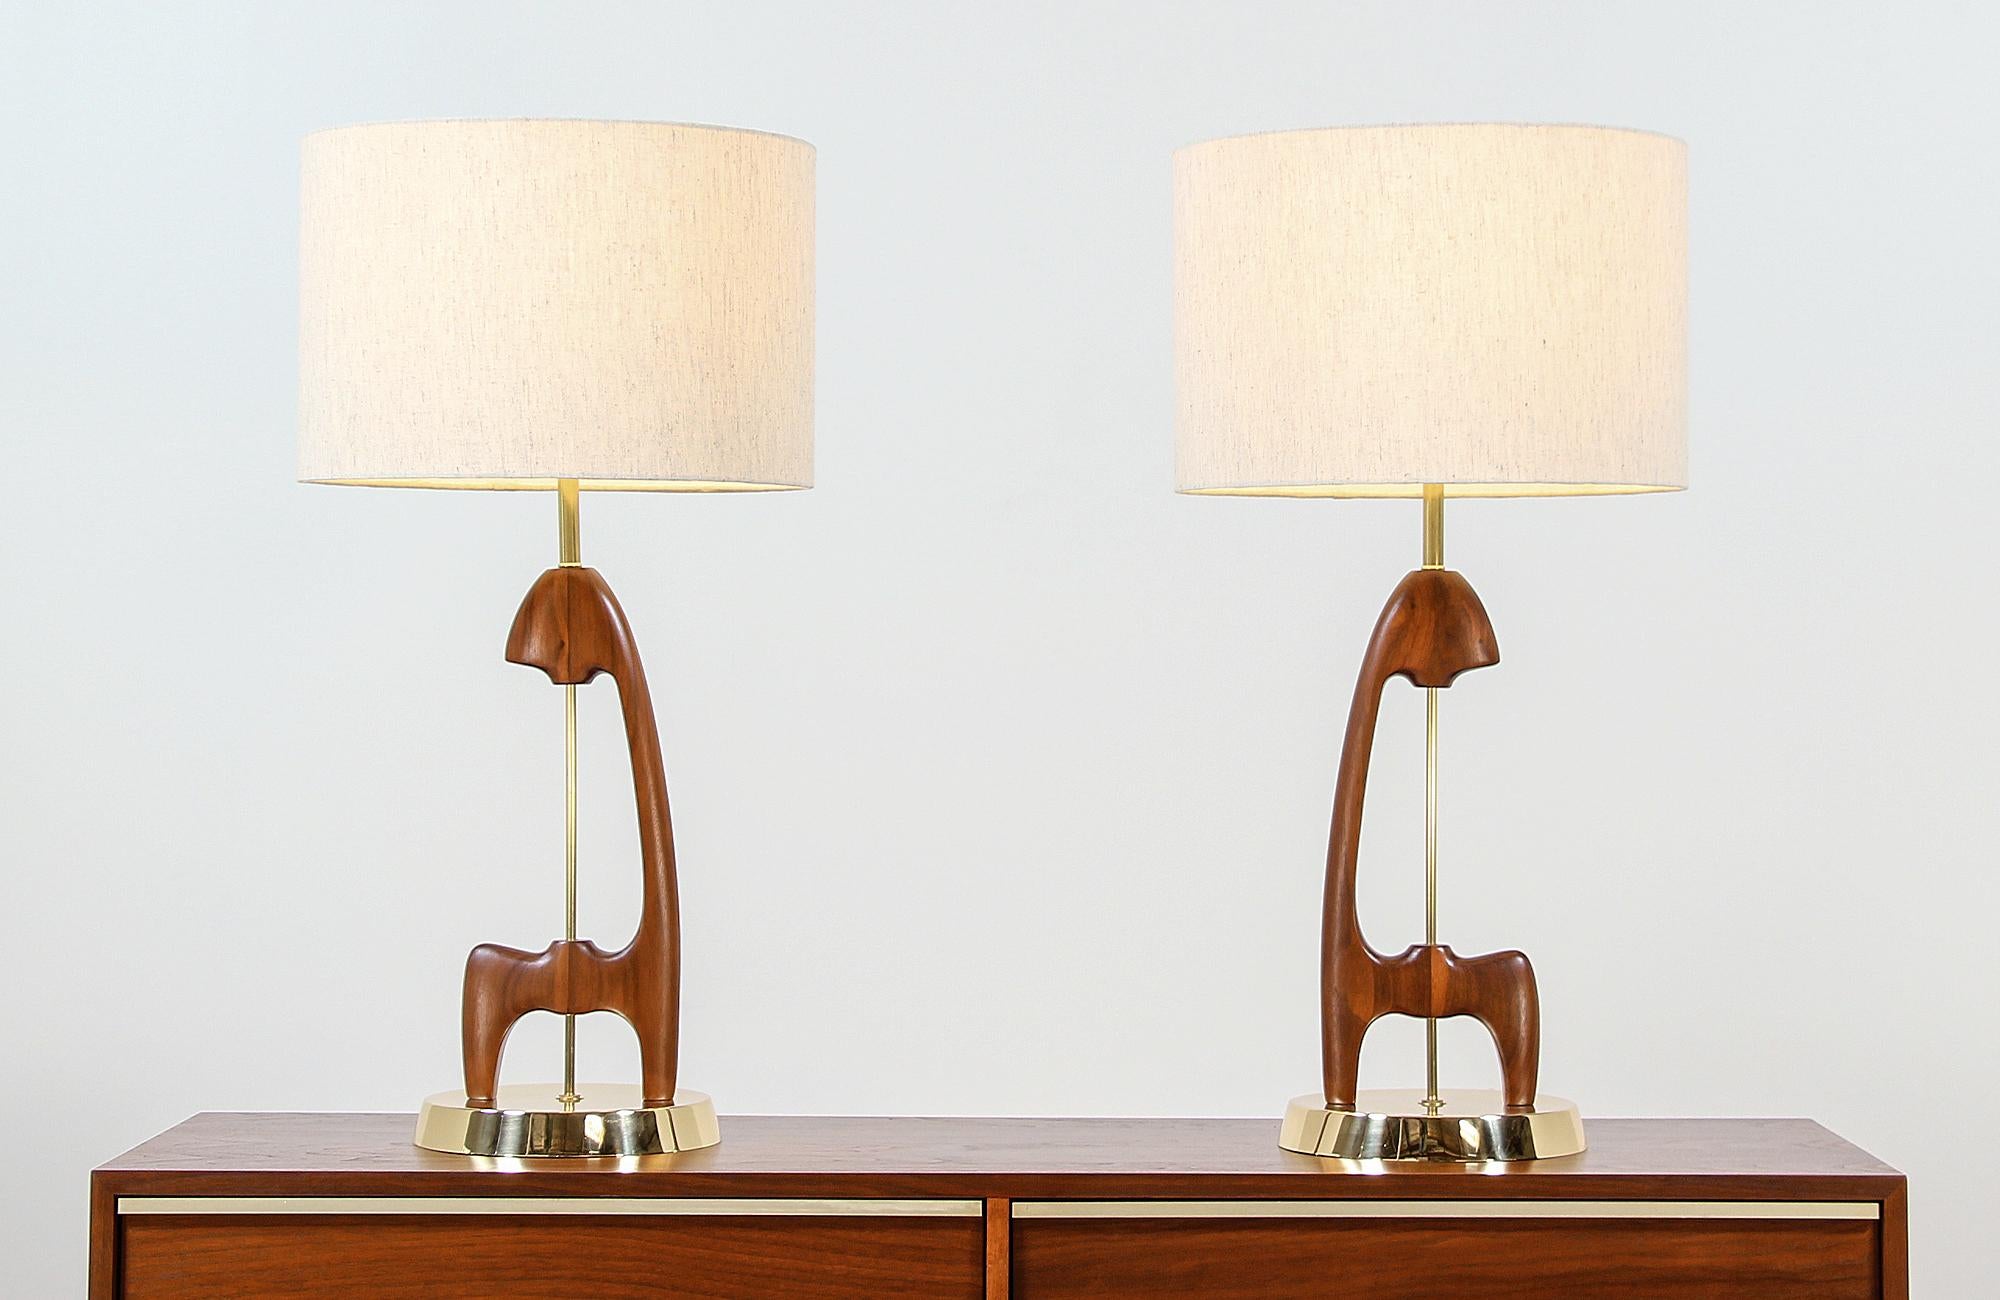 Dazzling pair of modern table lamps designed and manufactured in the United States circa 1960s. This stunning Mid-Century Modern lighting design features a sculptural walnut body with newly polished brass base and hardware complemented with varying